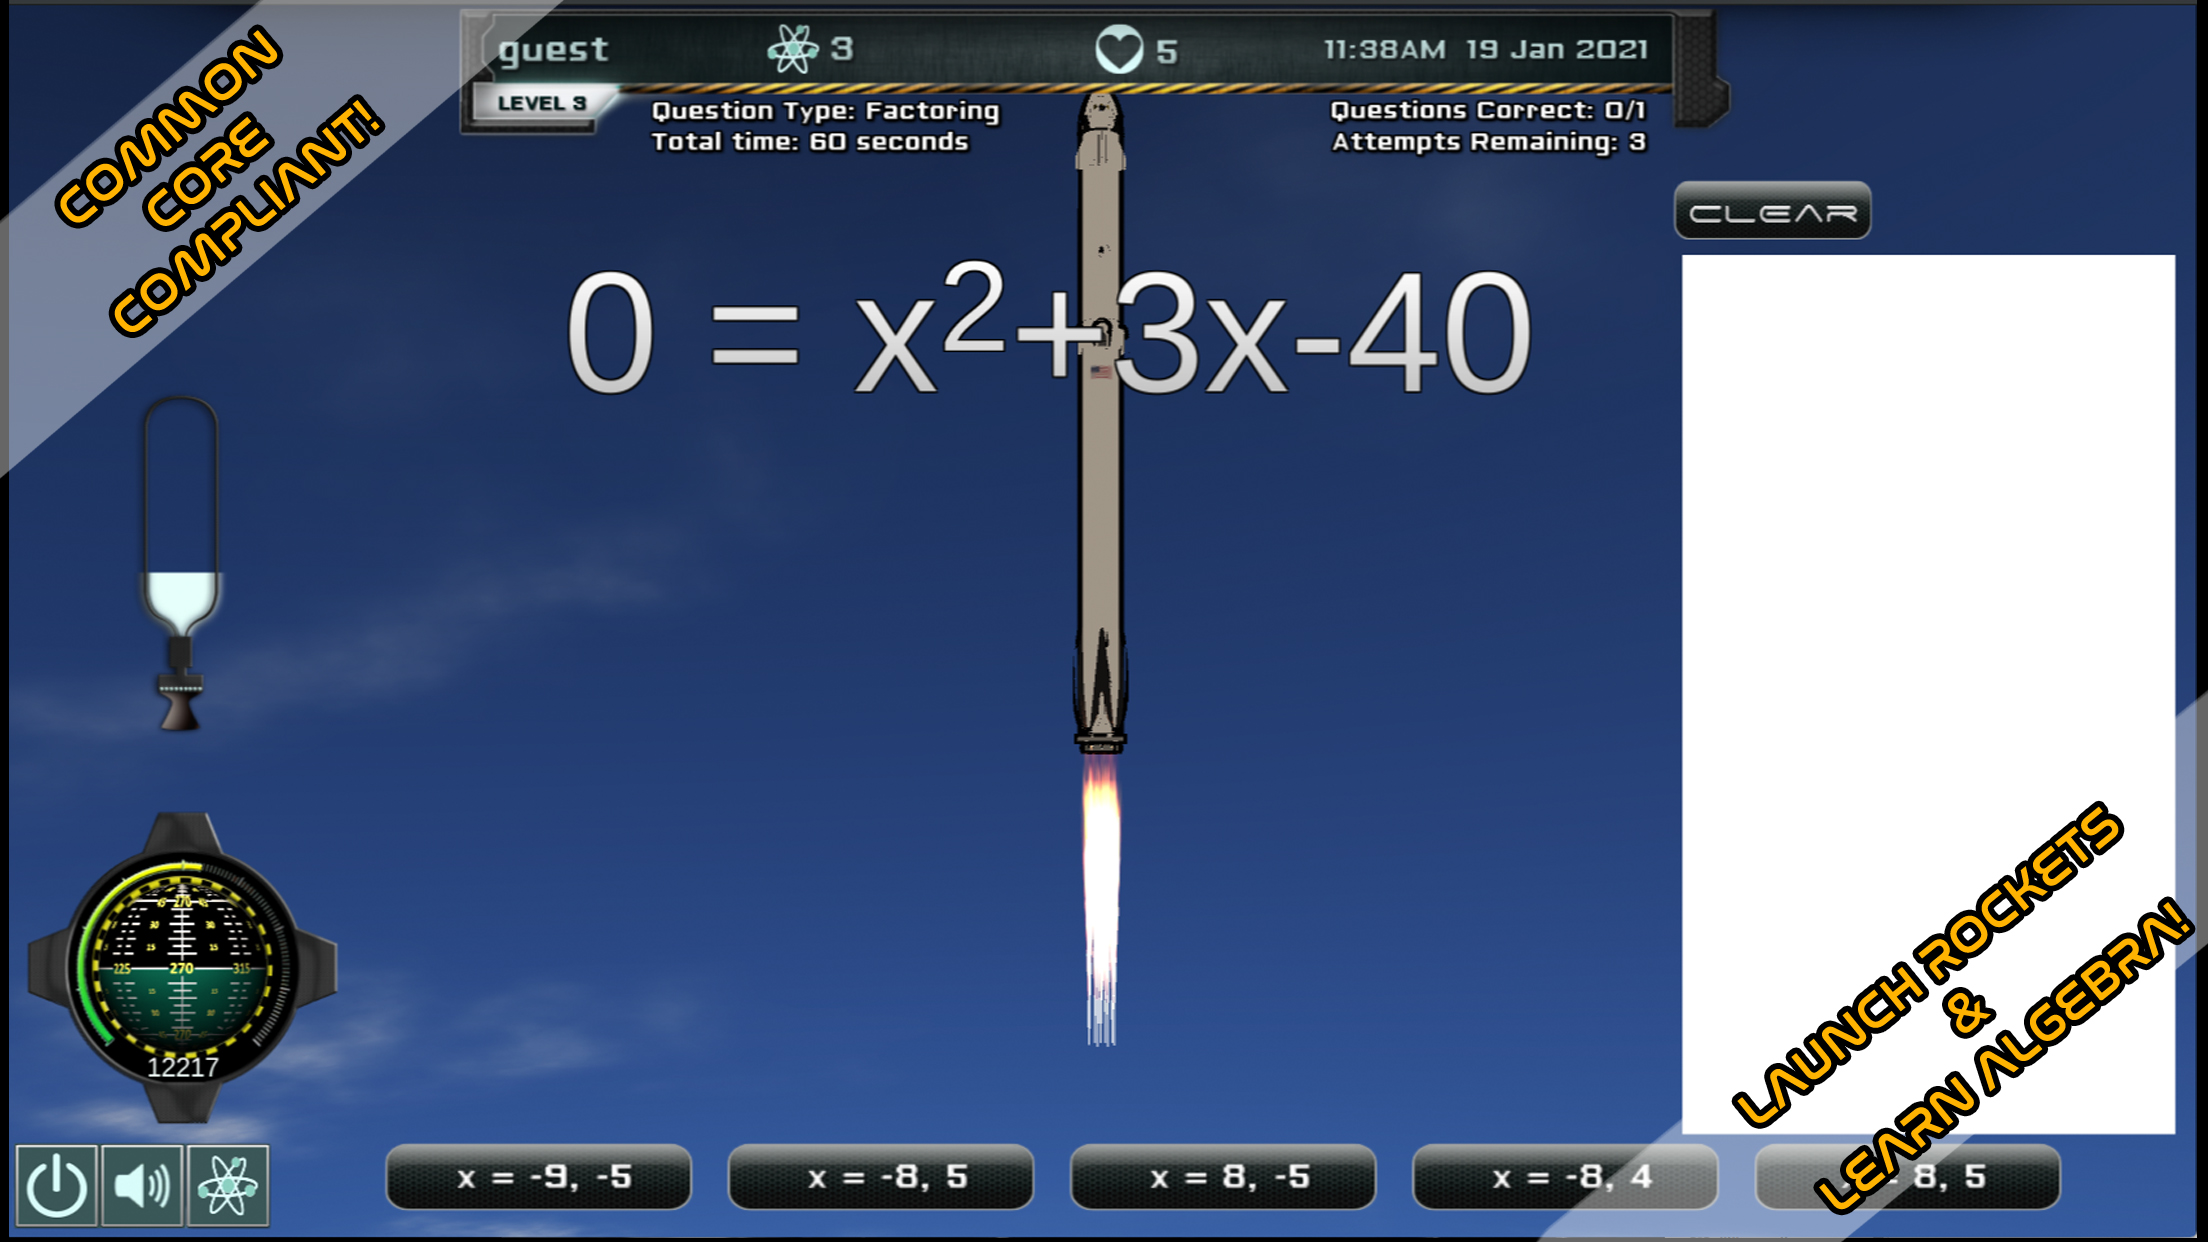 Intergalactic Education e learning STEM screenshot gameplay aligns with Common Core standards